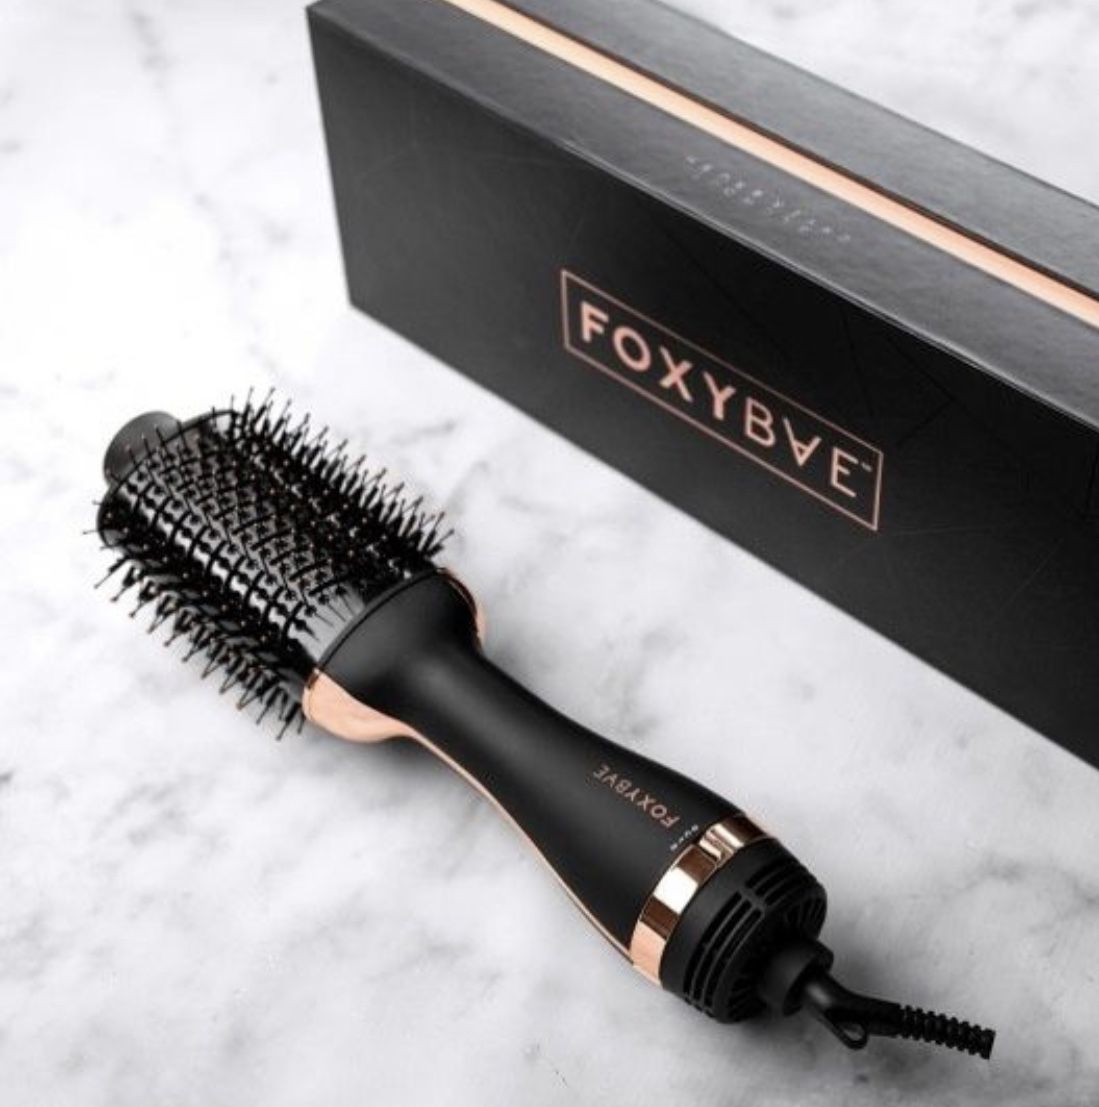 Foxybae Blowout Dryer Brush NEW! Rose Gold 75mm, Hair Styling Tool, New In Box Sealed